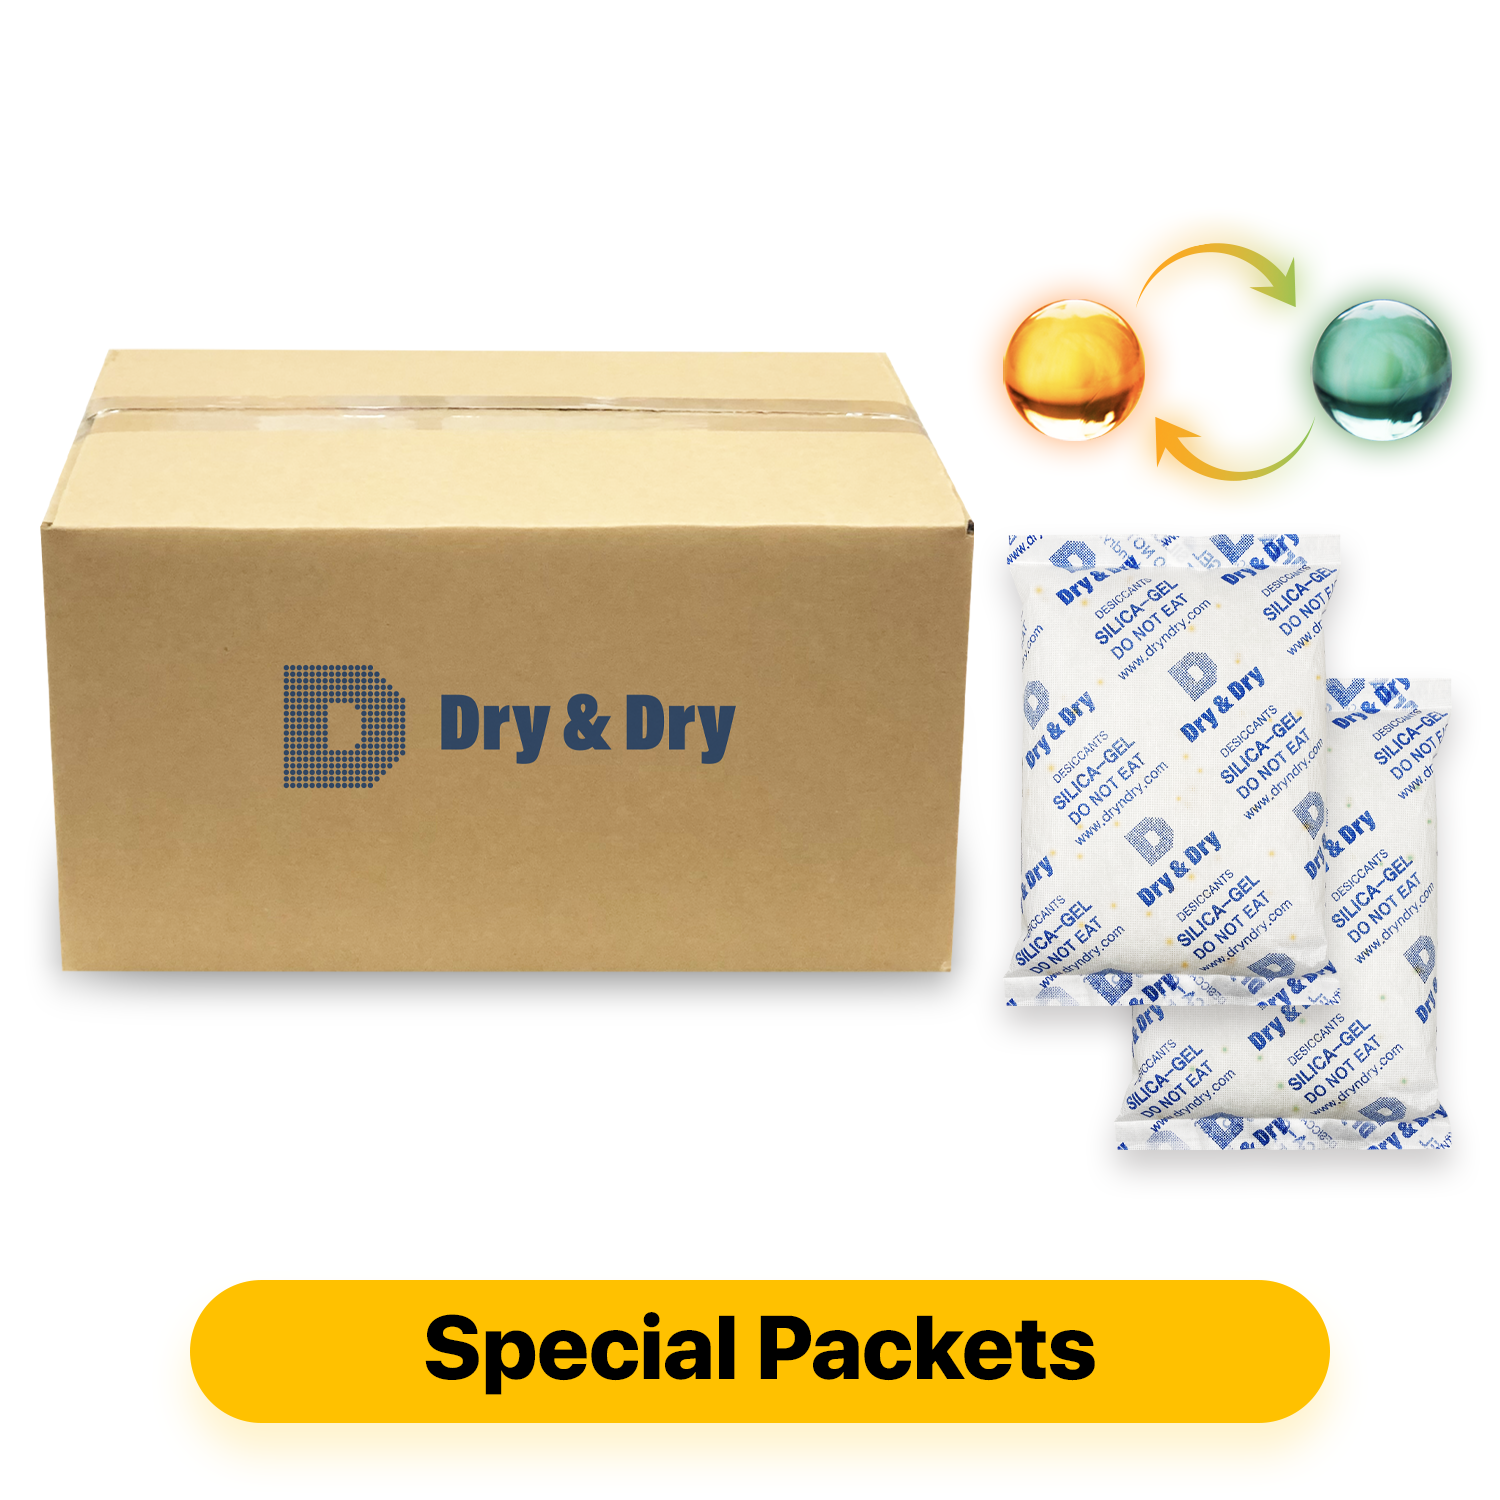 500 Gram [40 Packs] "Dry & Dry" SPECIAL Food Safe Orange Indicating(Orange to Dark Green) Mixed Silica Gel Packets - Rechargeable(FDA Compliant)